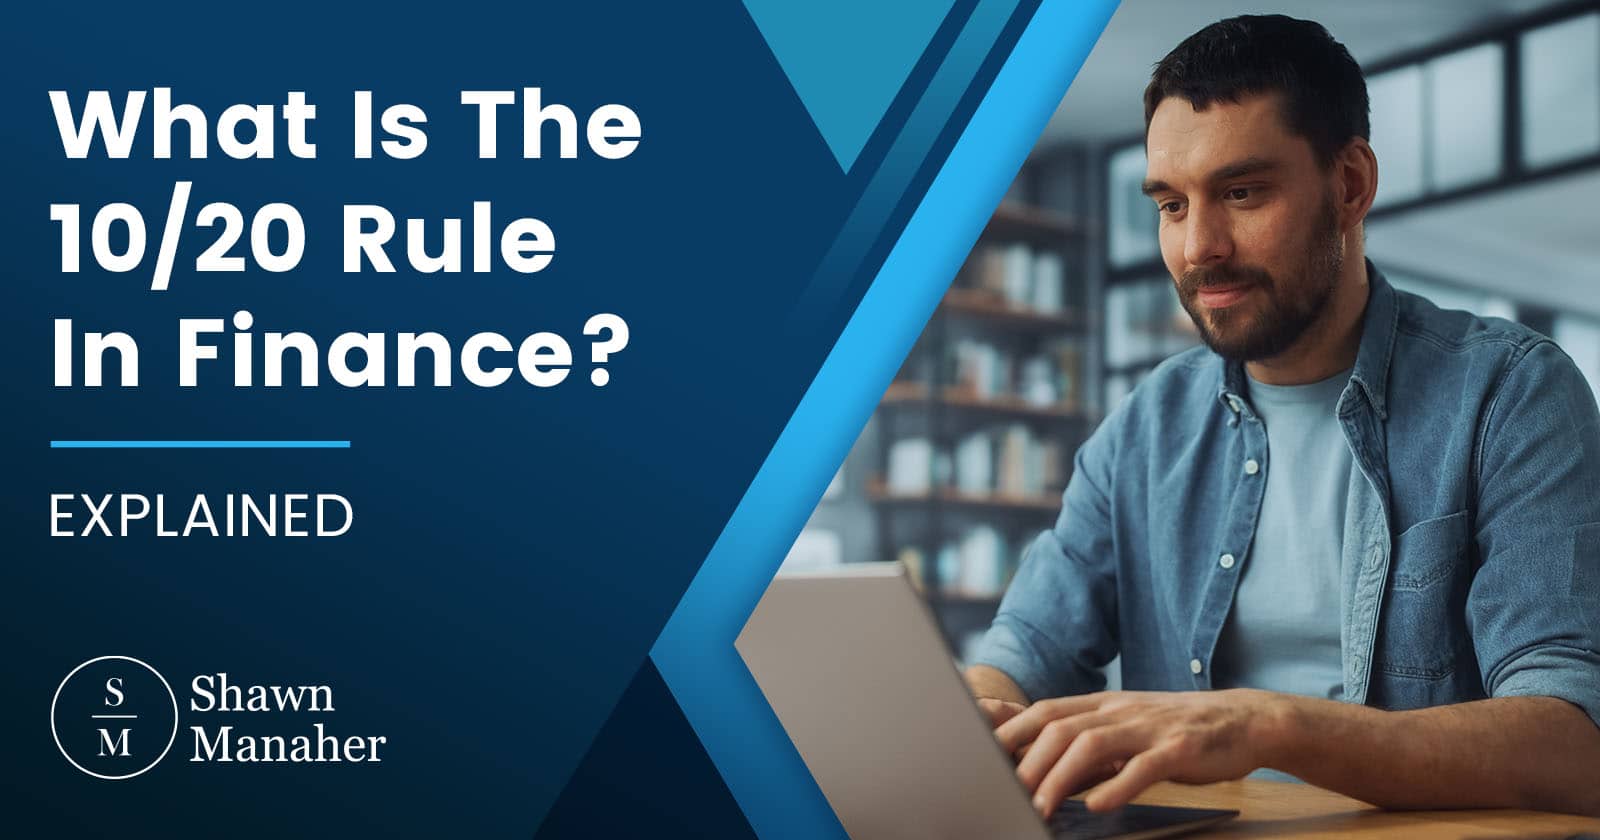 What Is the 10/20 Rule in Finance? [EXPLAINED]